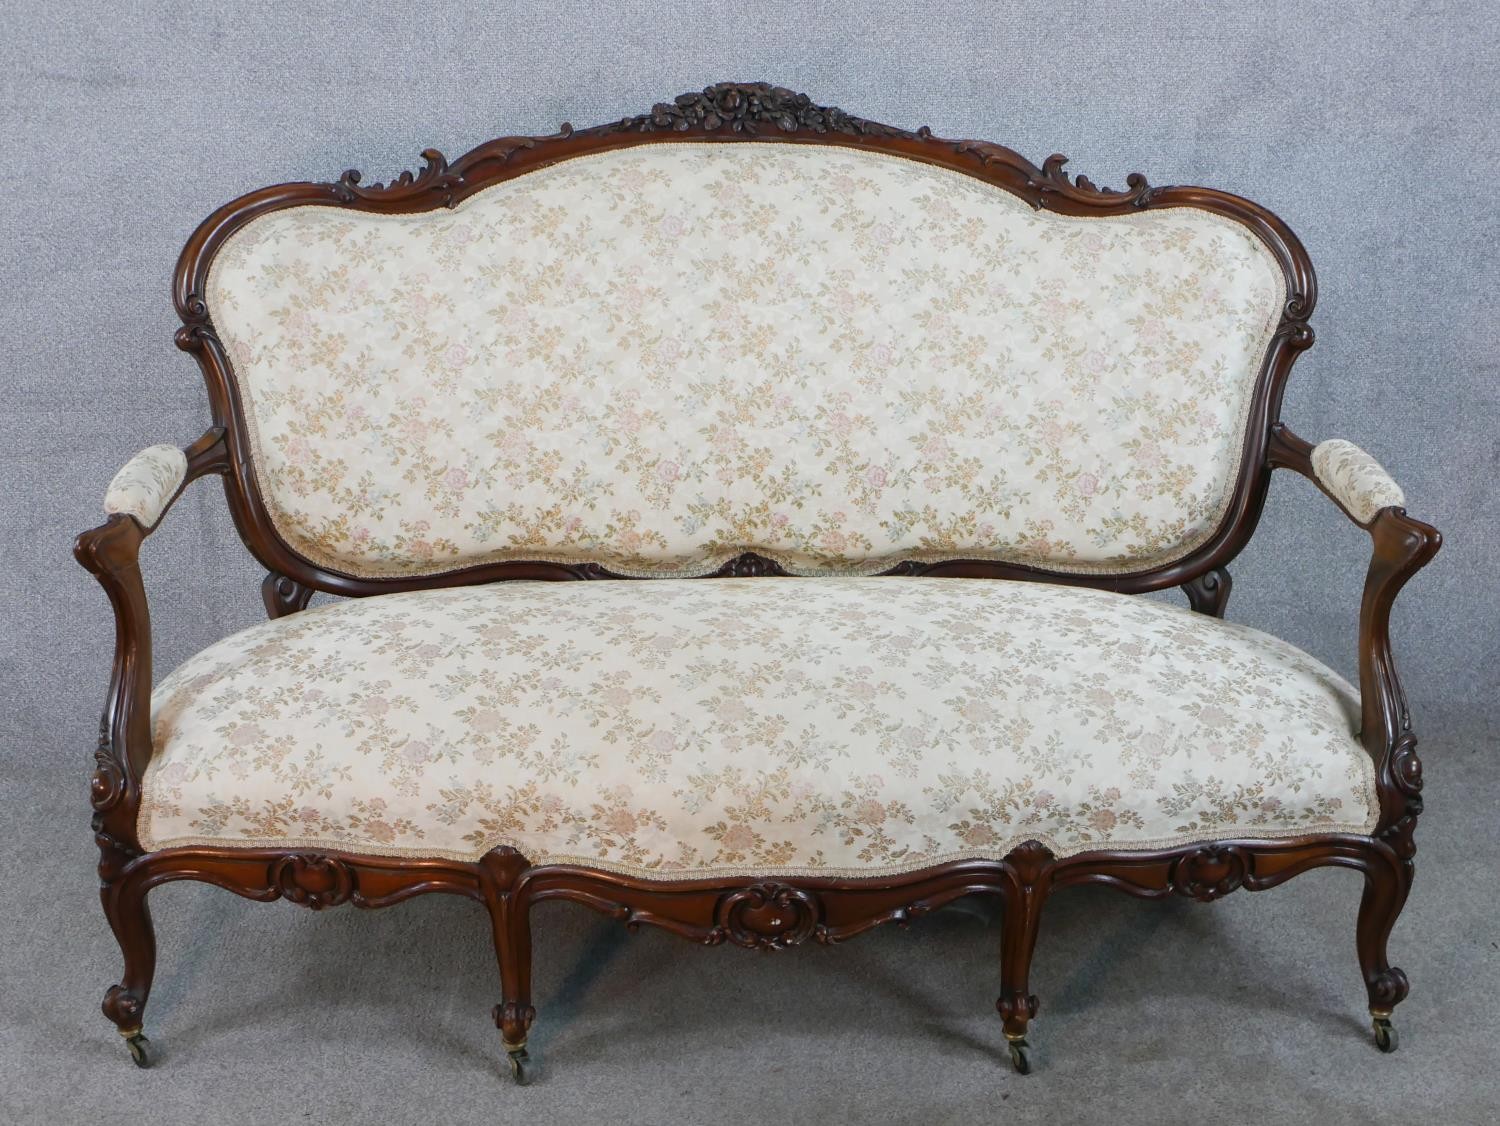 A 20th century French carved mahogany framed open arm settee, upholstered in cream fabric, raised on